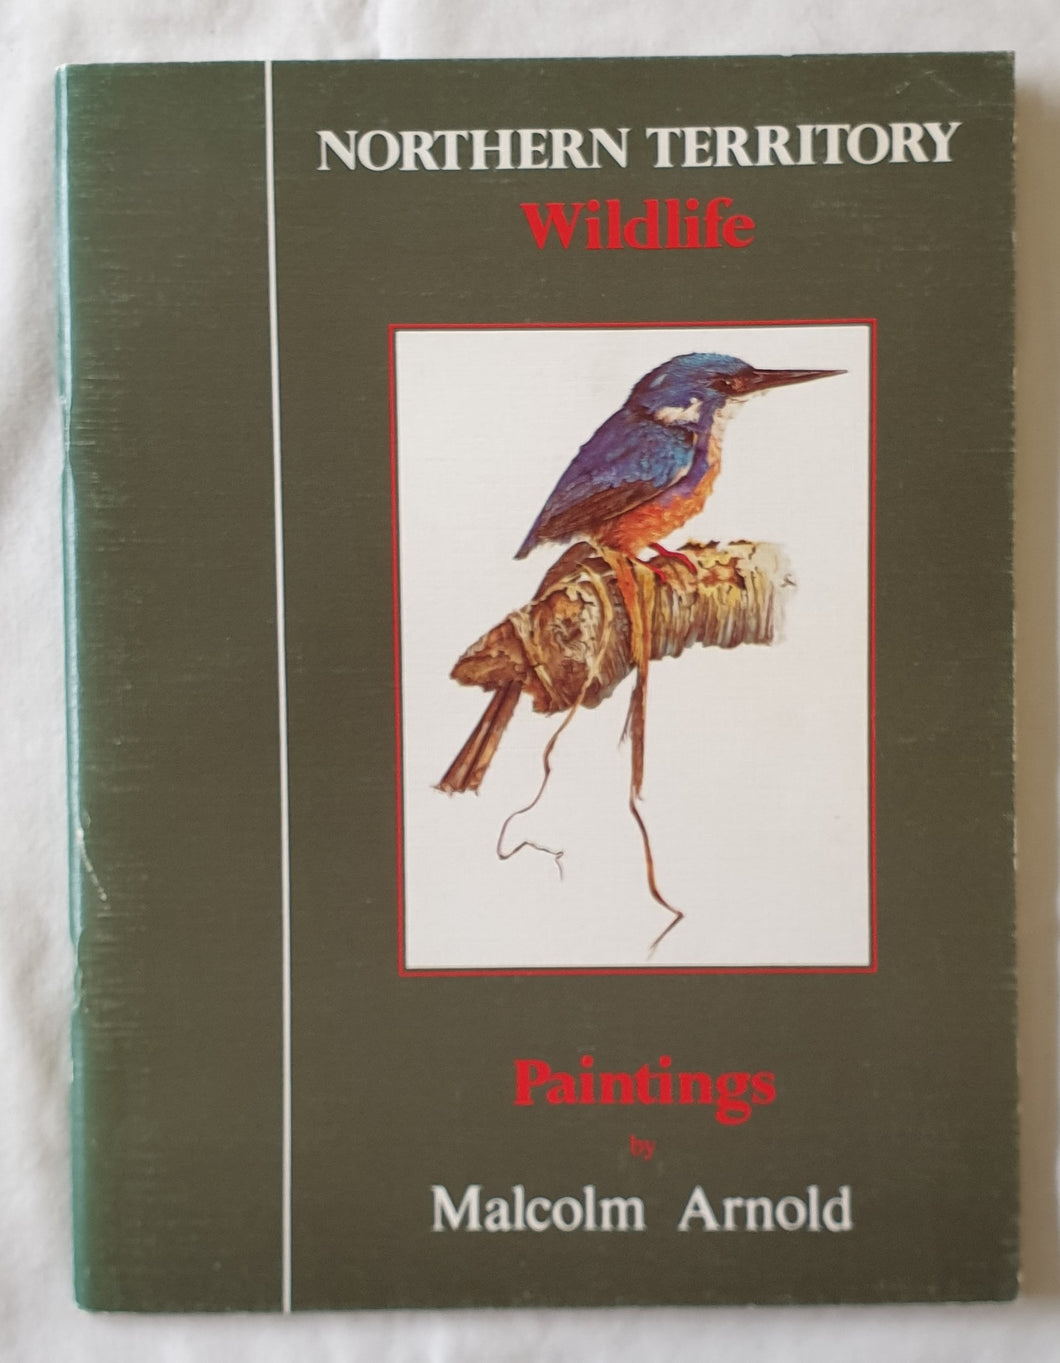 Northern Territory Wildlife by Malcolm Arnold